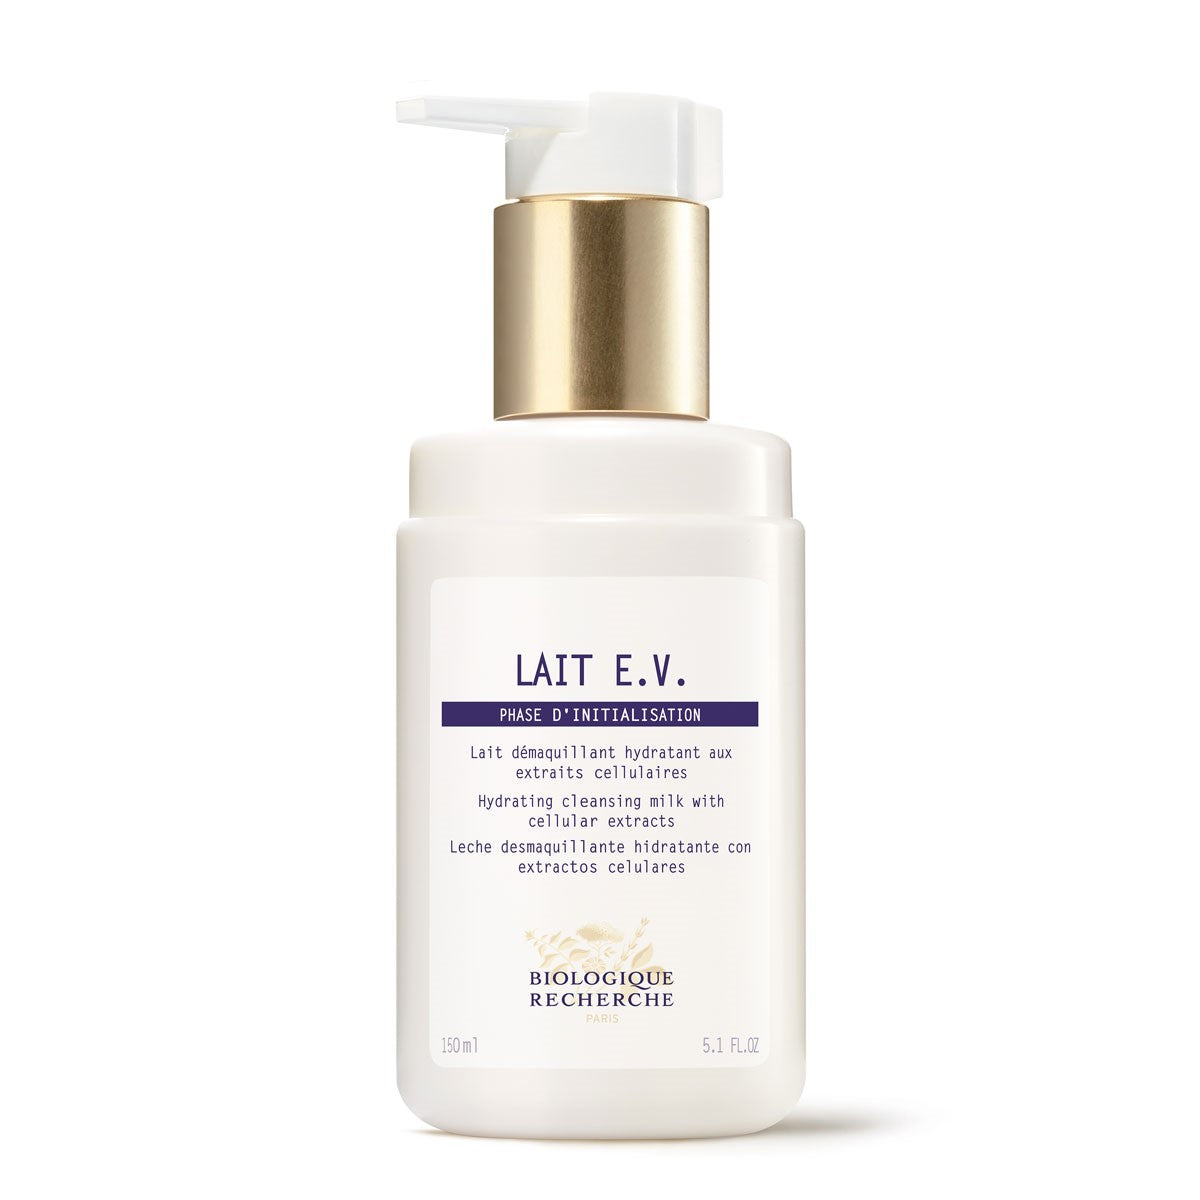 Lait E.V. -- Moisturizing & Lipid Restoring Makeup Remover ** Dehydrated Skin Face Cleanser